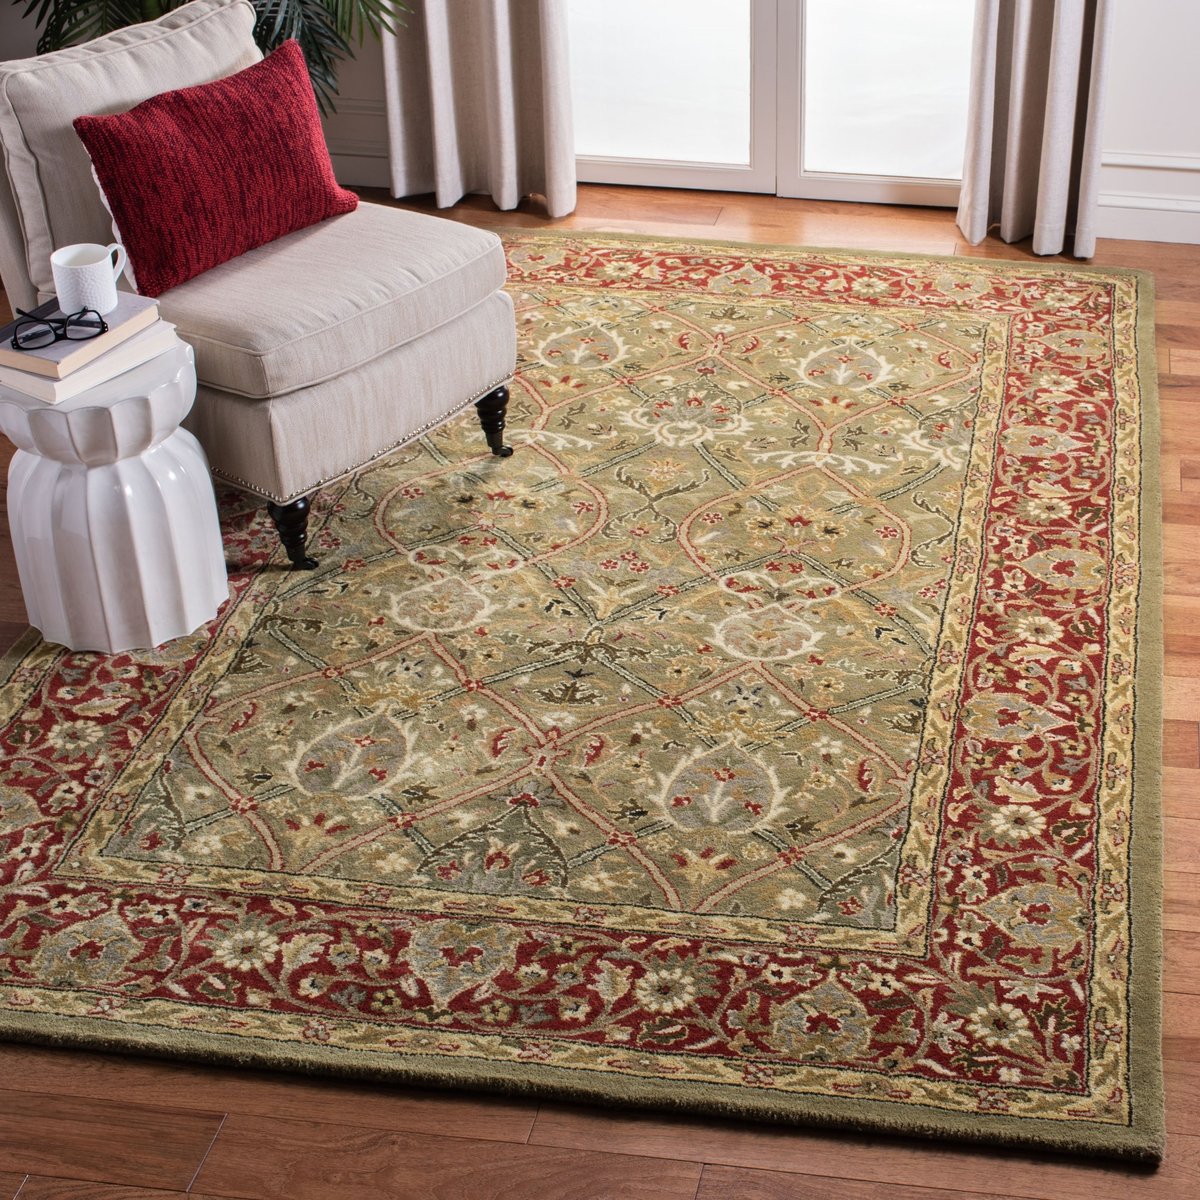 8' x 8' Round Safavieh Persian Legend Collection PL819A Handmade Traditional Premium Wool Area Rug Beige Light Green 